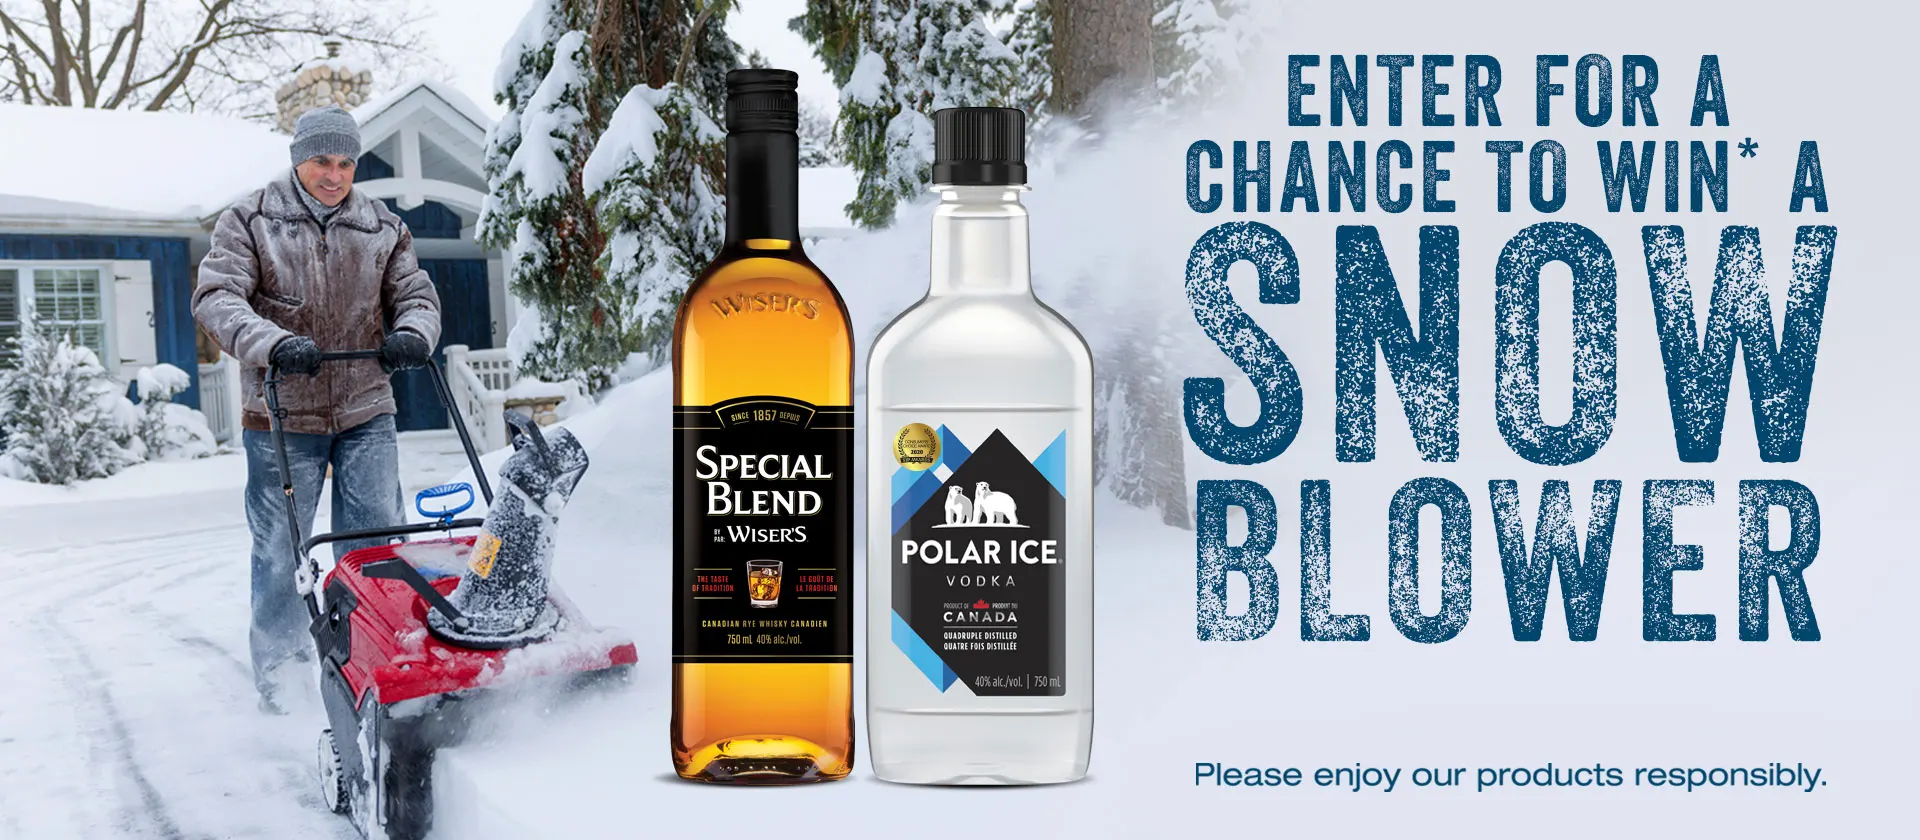 Enter for a chance to win* a Snowblower. Please enjoy our products responsibly.